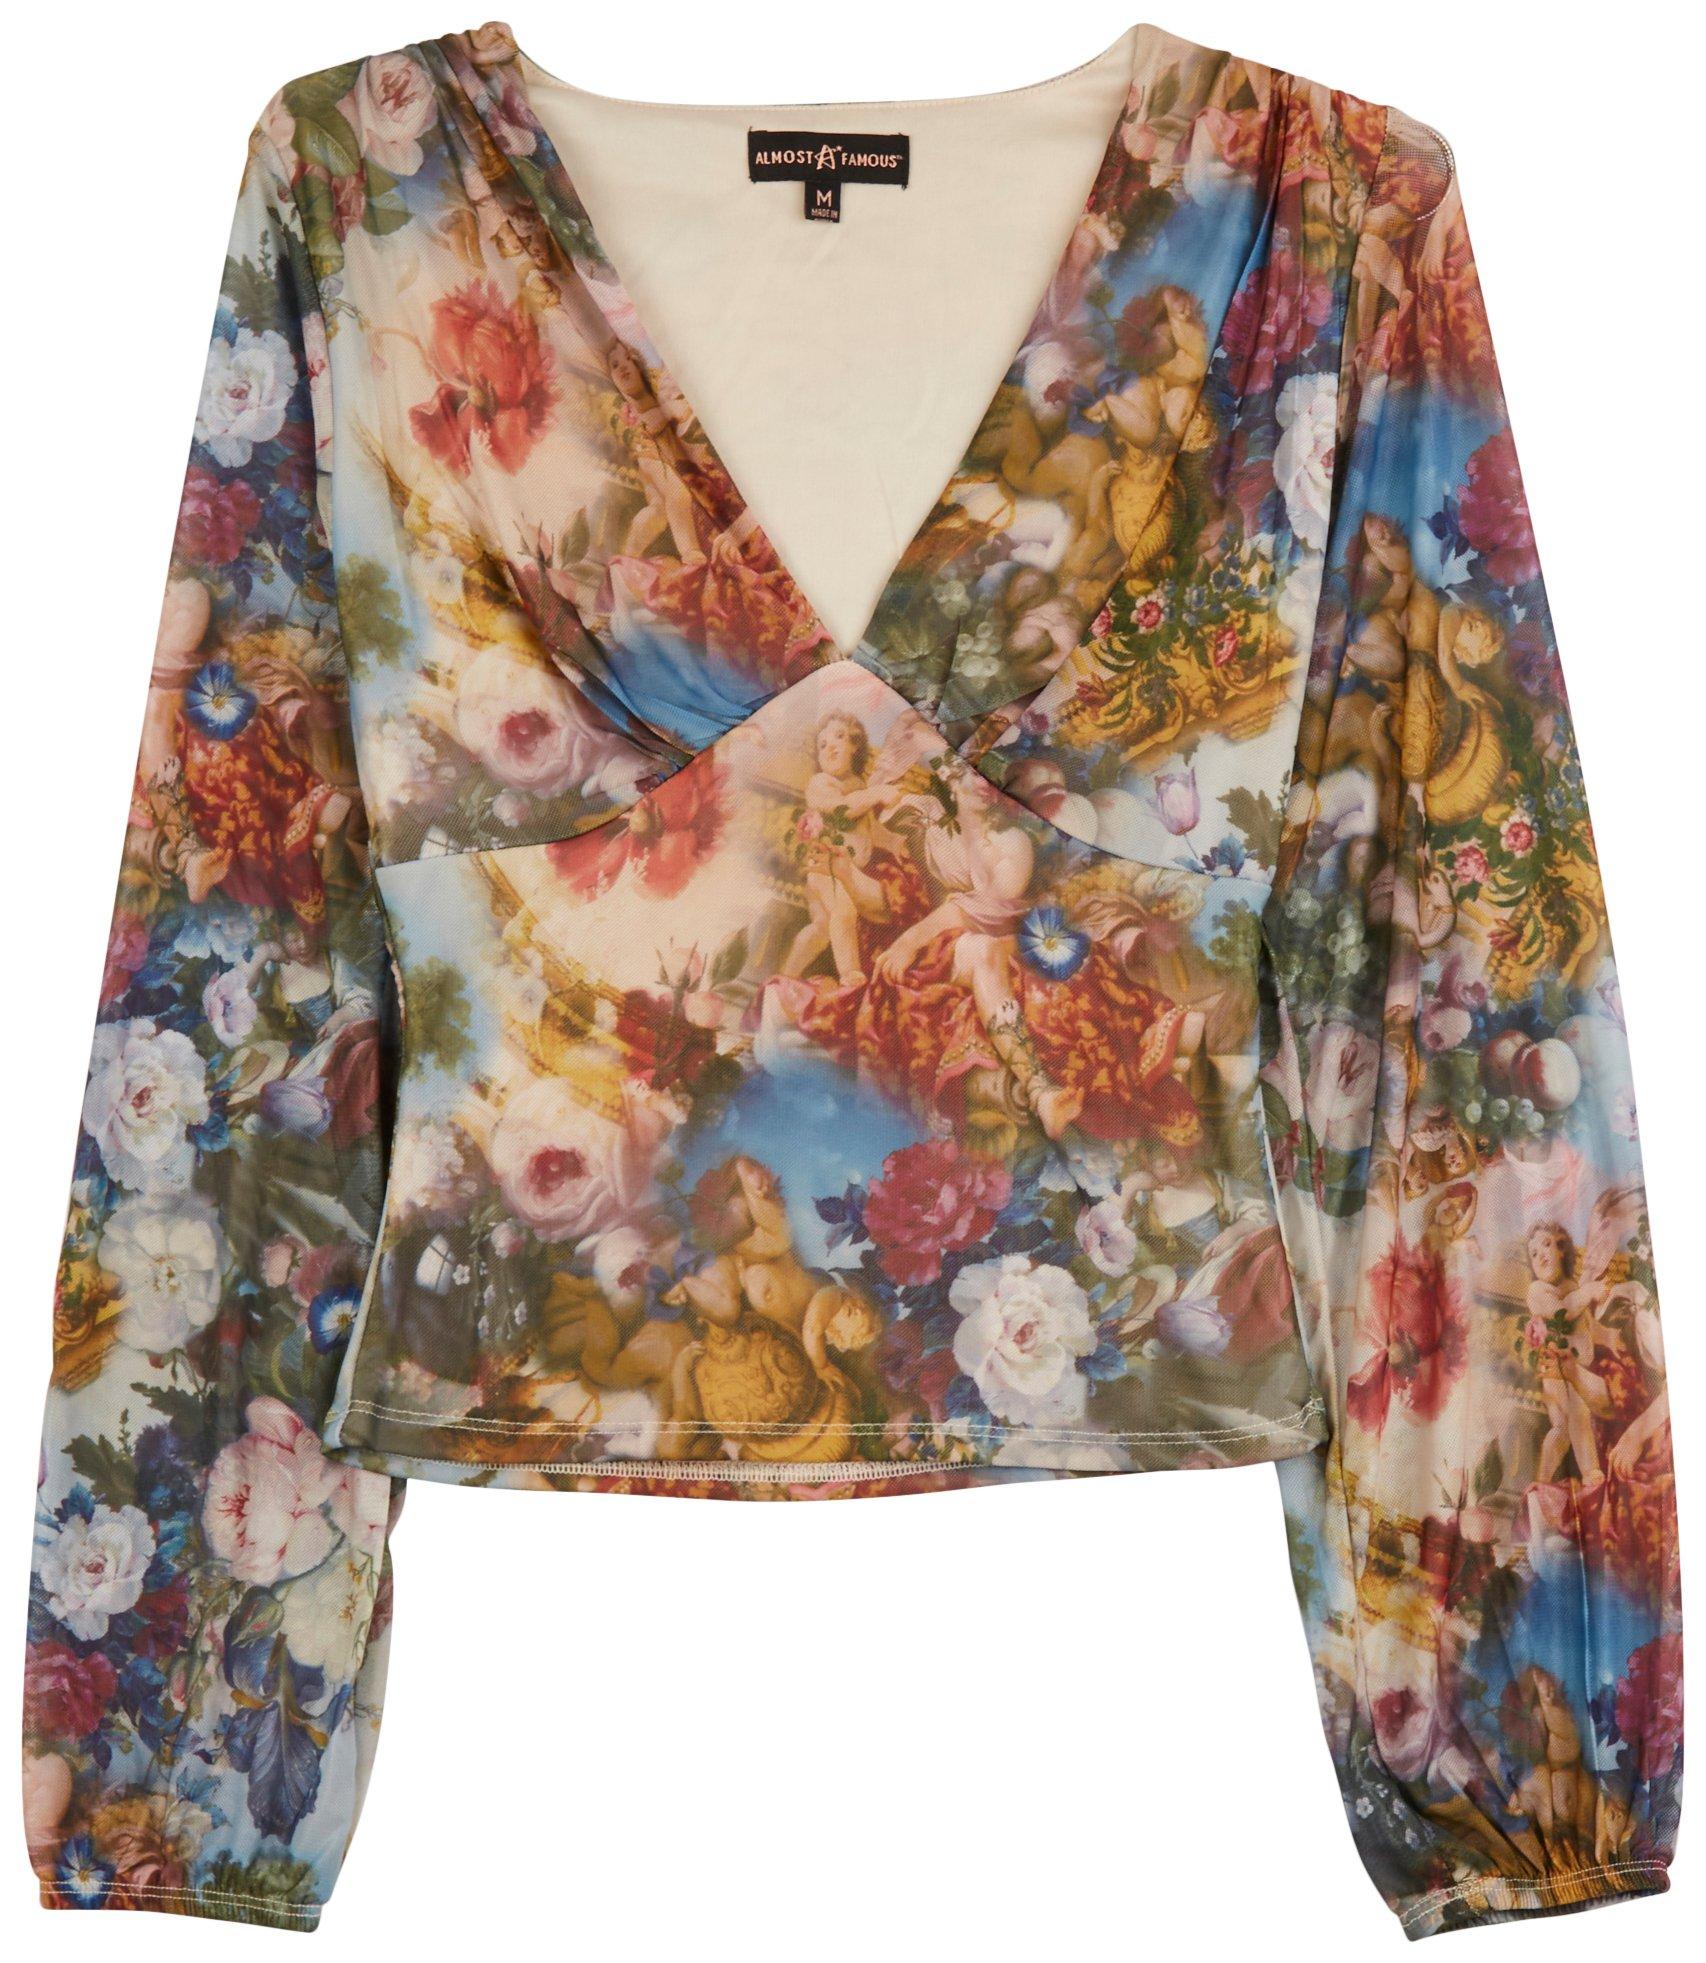 Almost Famous Juniors V-Neck Floral Printed Long Sleeve Top